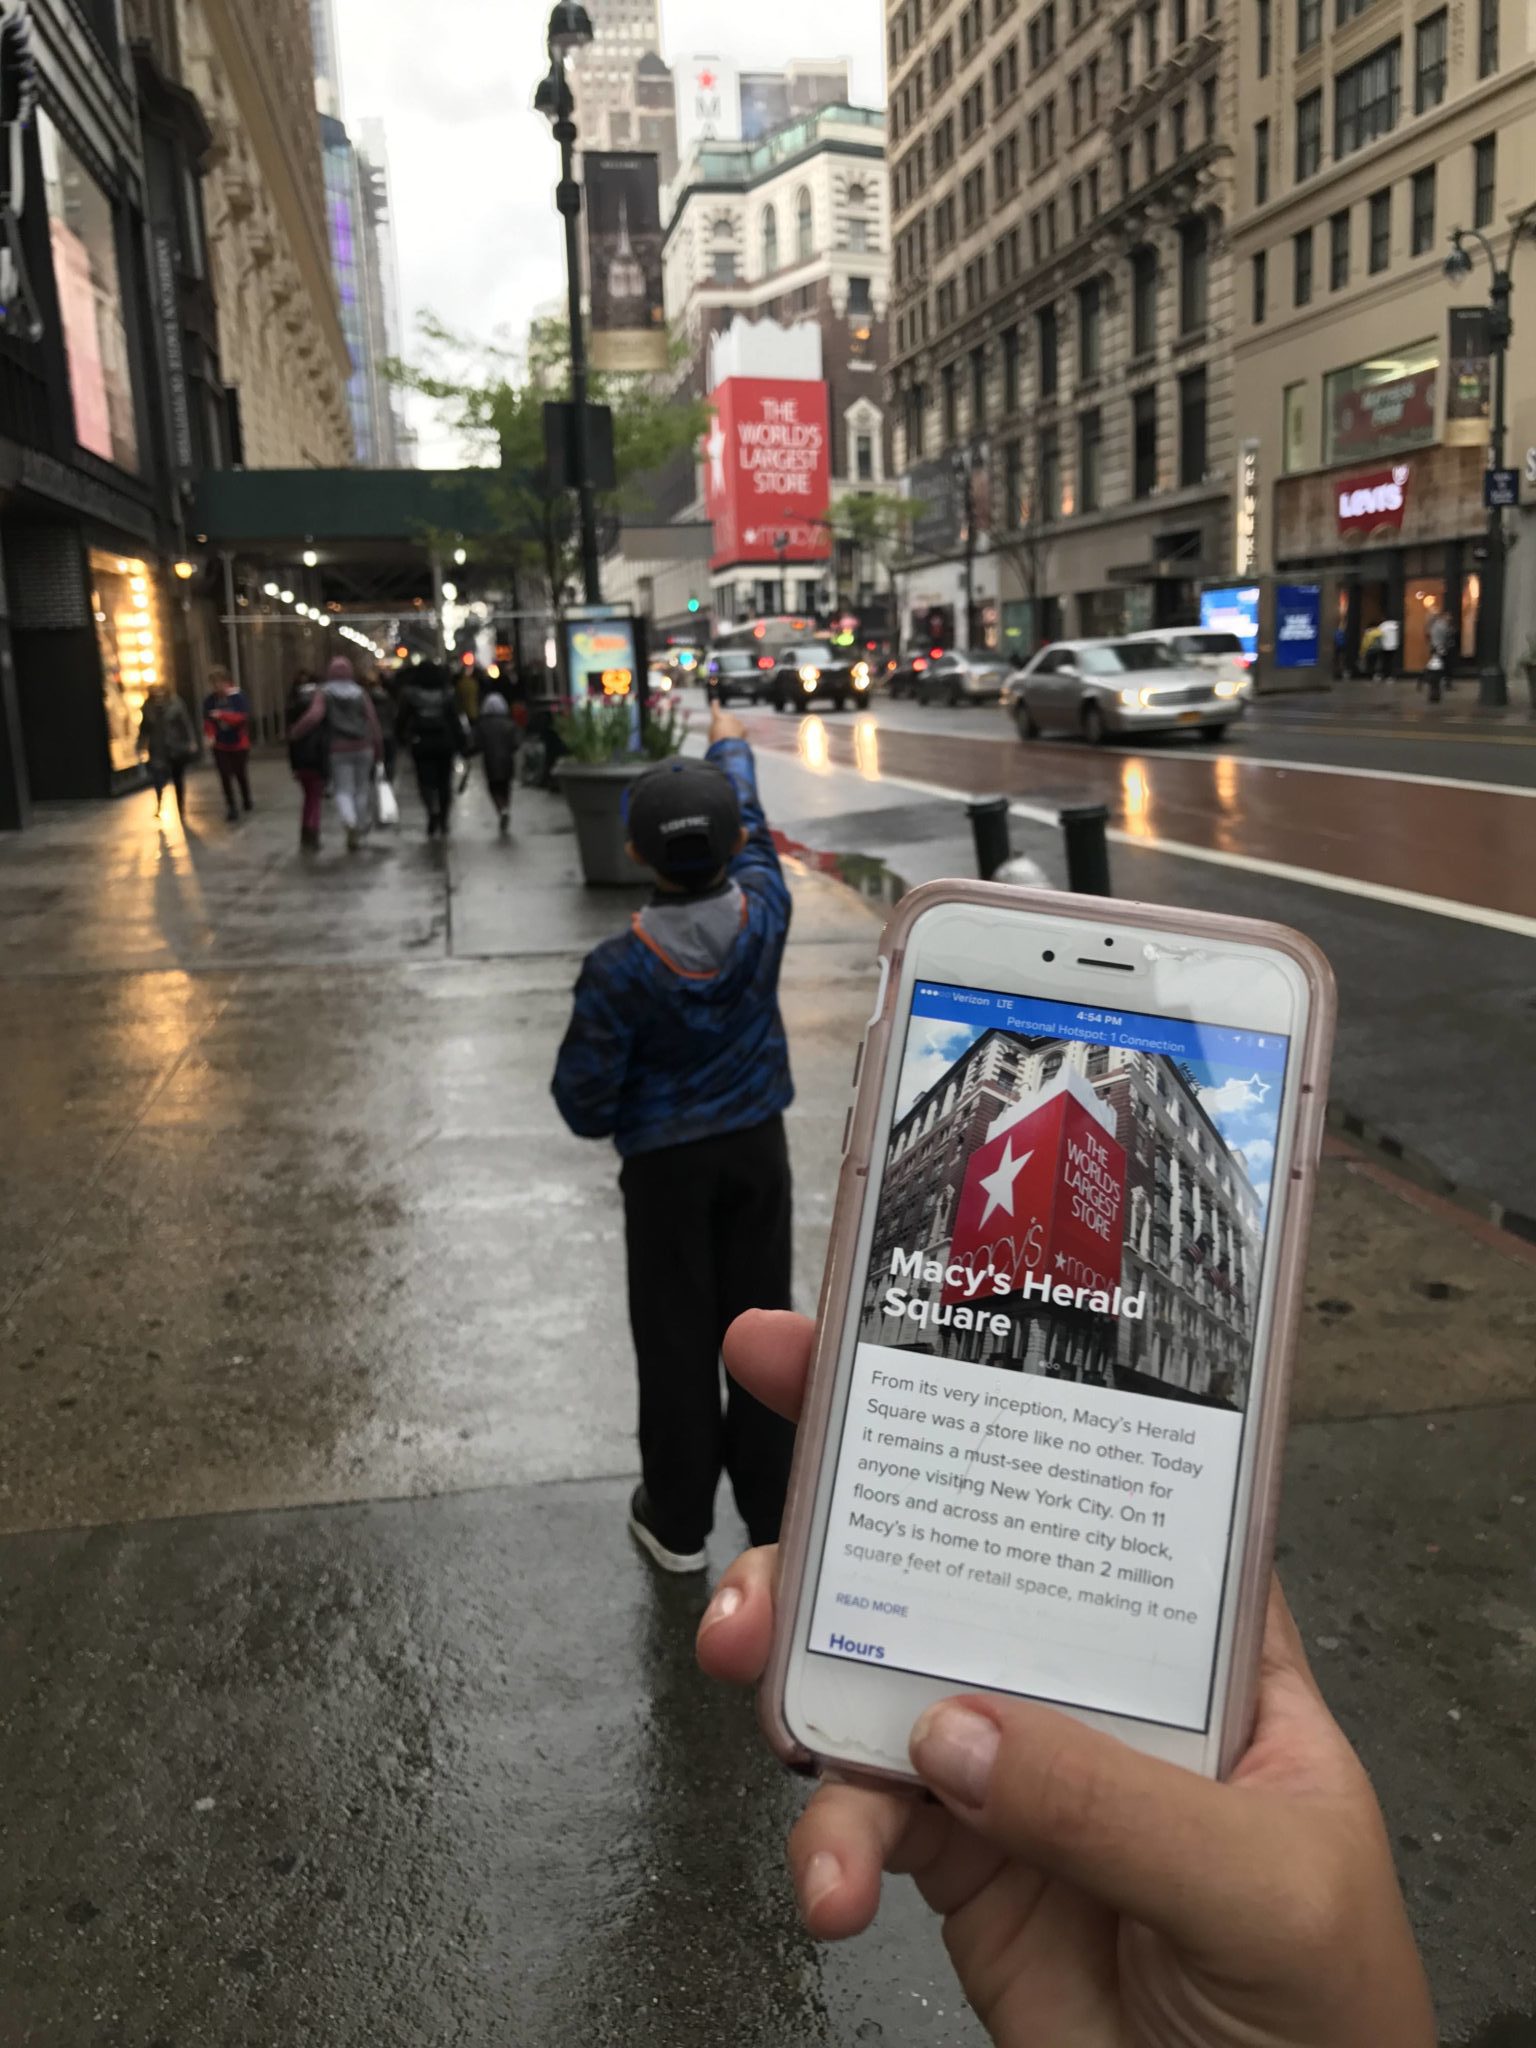 Looking for the best way to explore NYC? The Destination Midtown app is your best option for how to see the best of midtown manhattan. Learn about our recent Walking Tour of 34th Street and more...